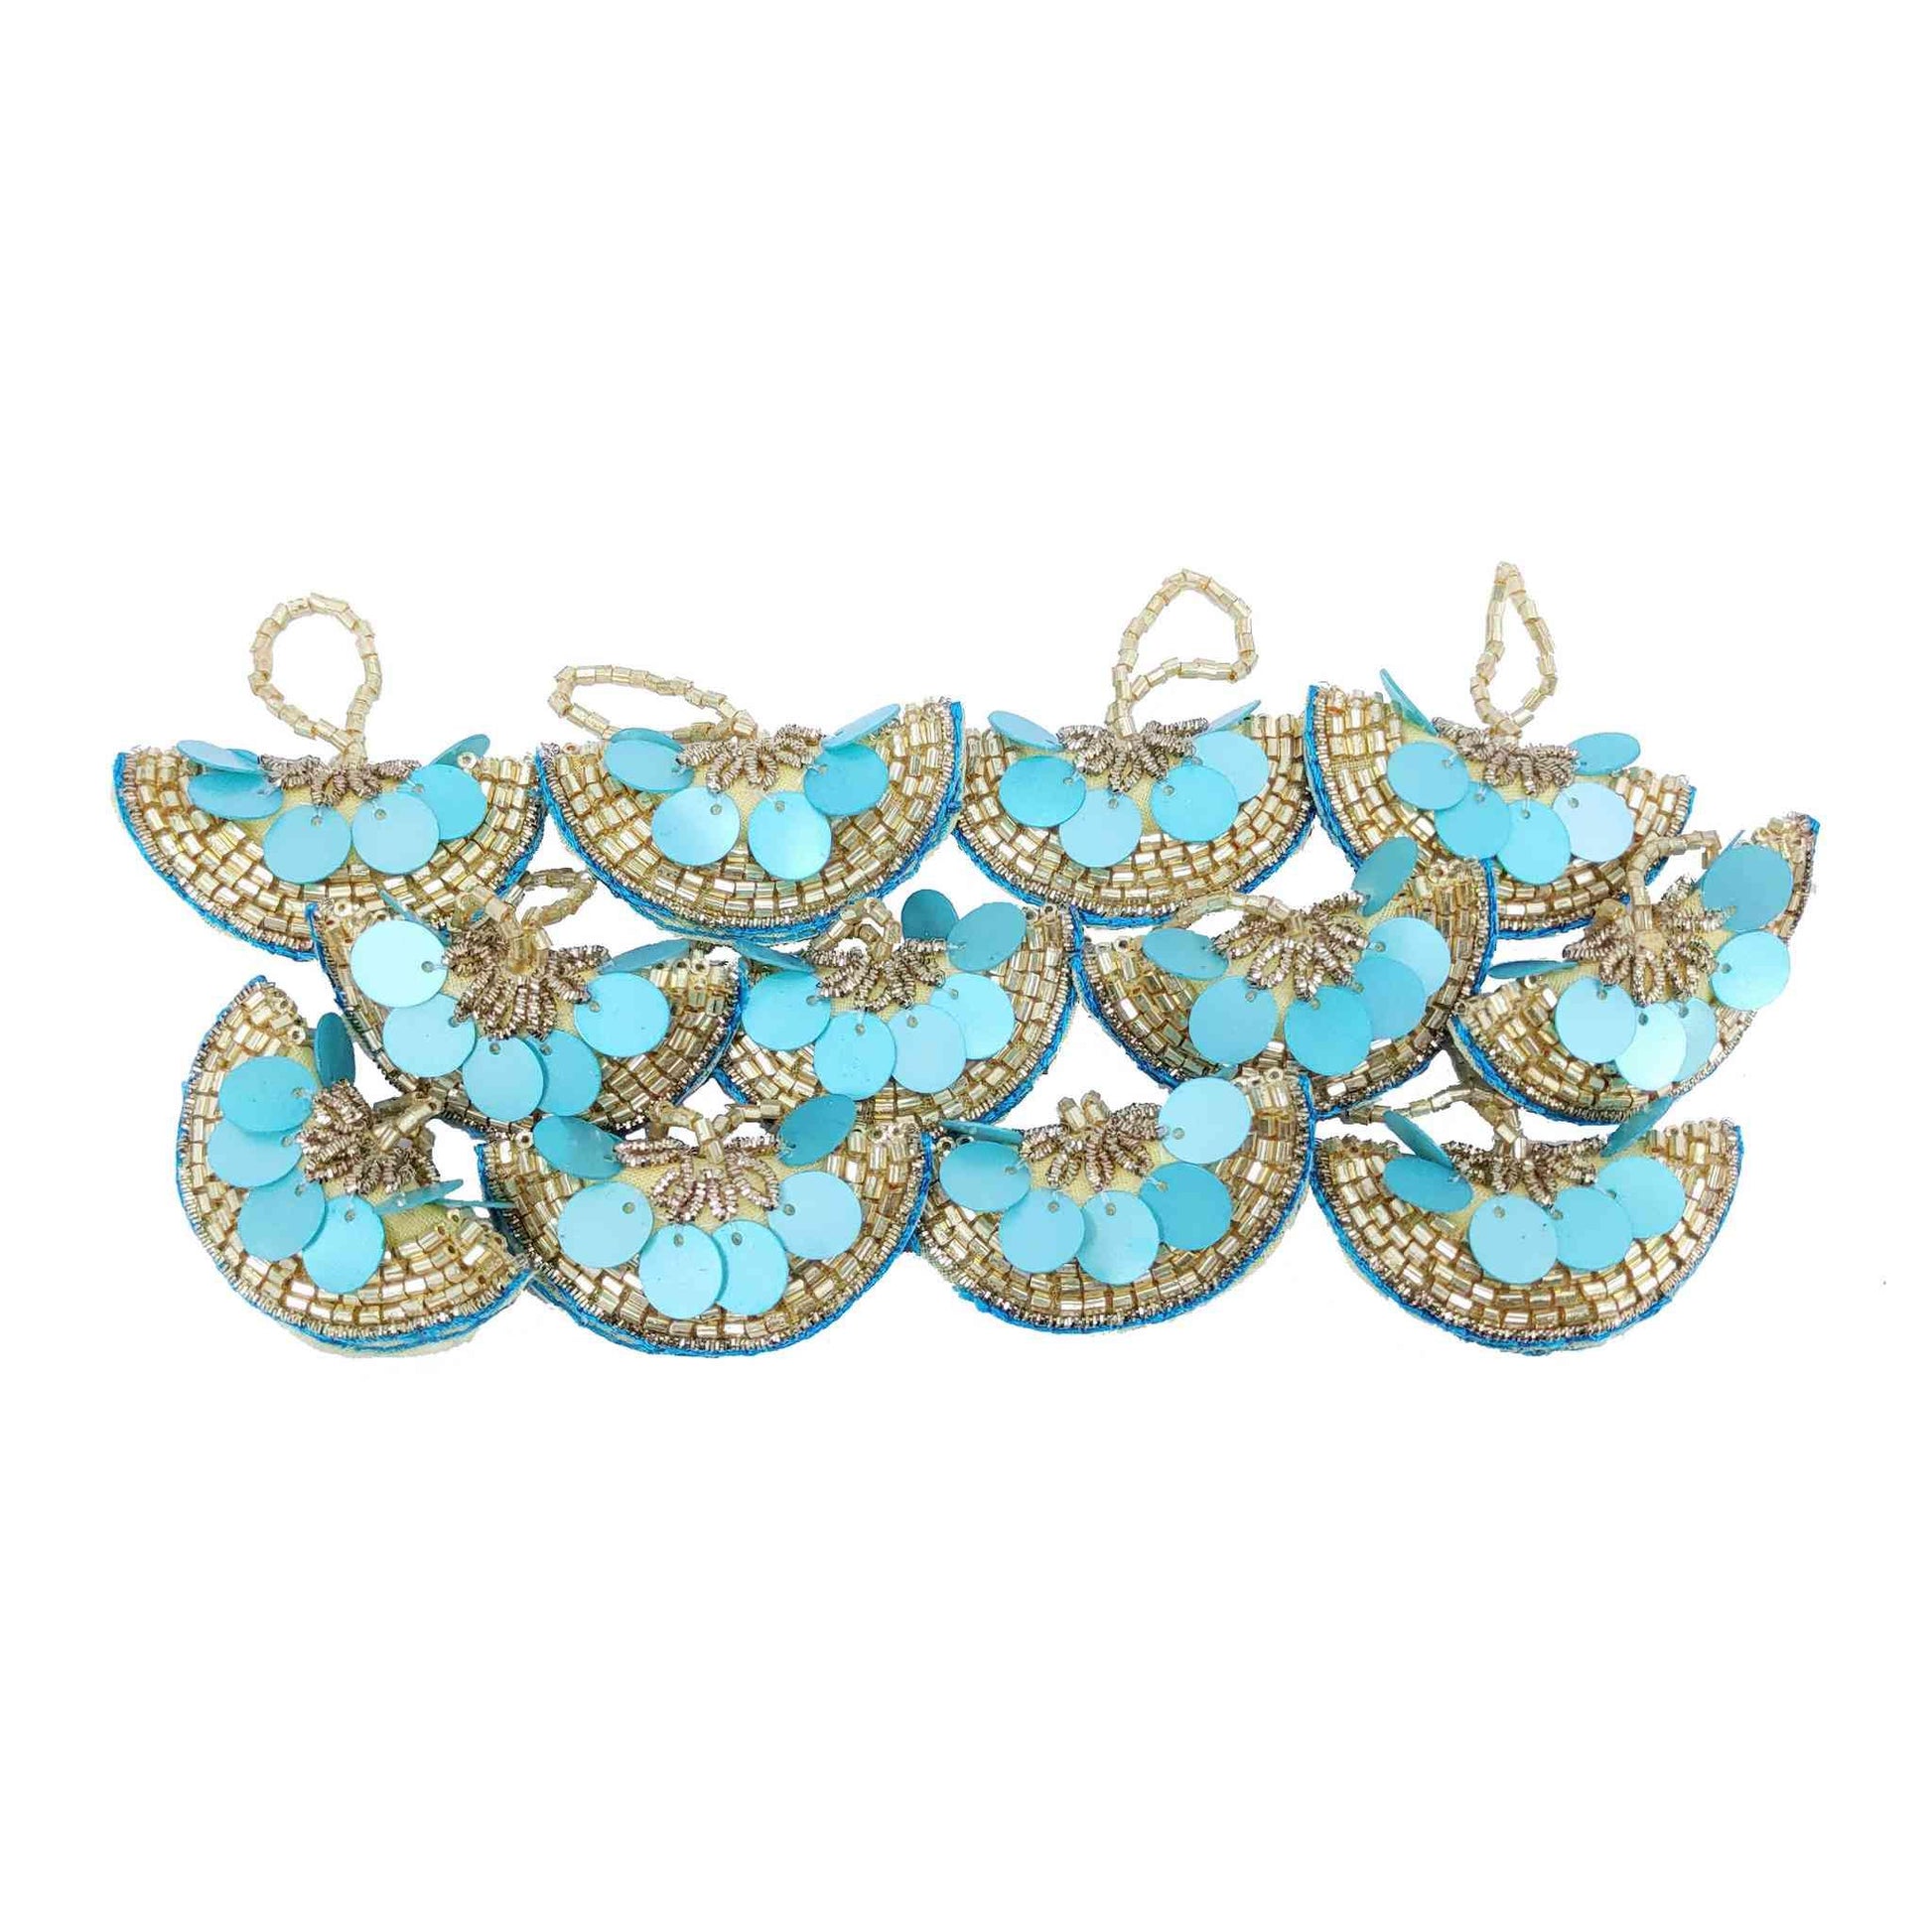 Indian Petals Designer Sequence Latkan Buti for DIY Craft, Trouseau Packing or Decoration (Bunch of 12) - Design 201, Turquoise - Indian Petals